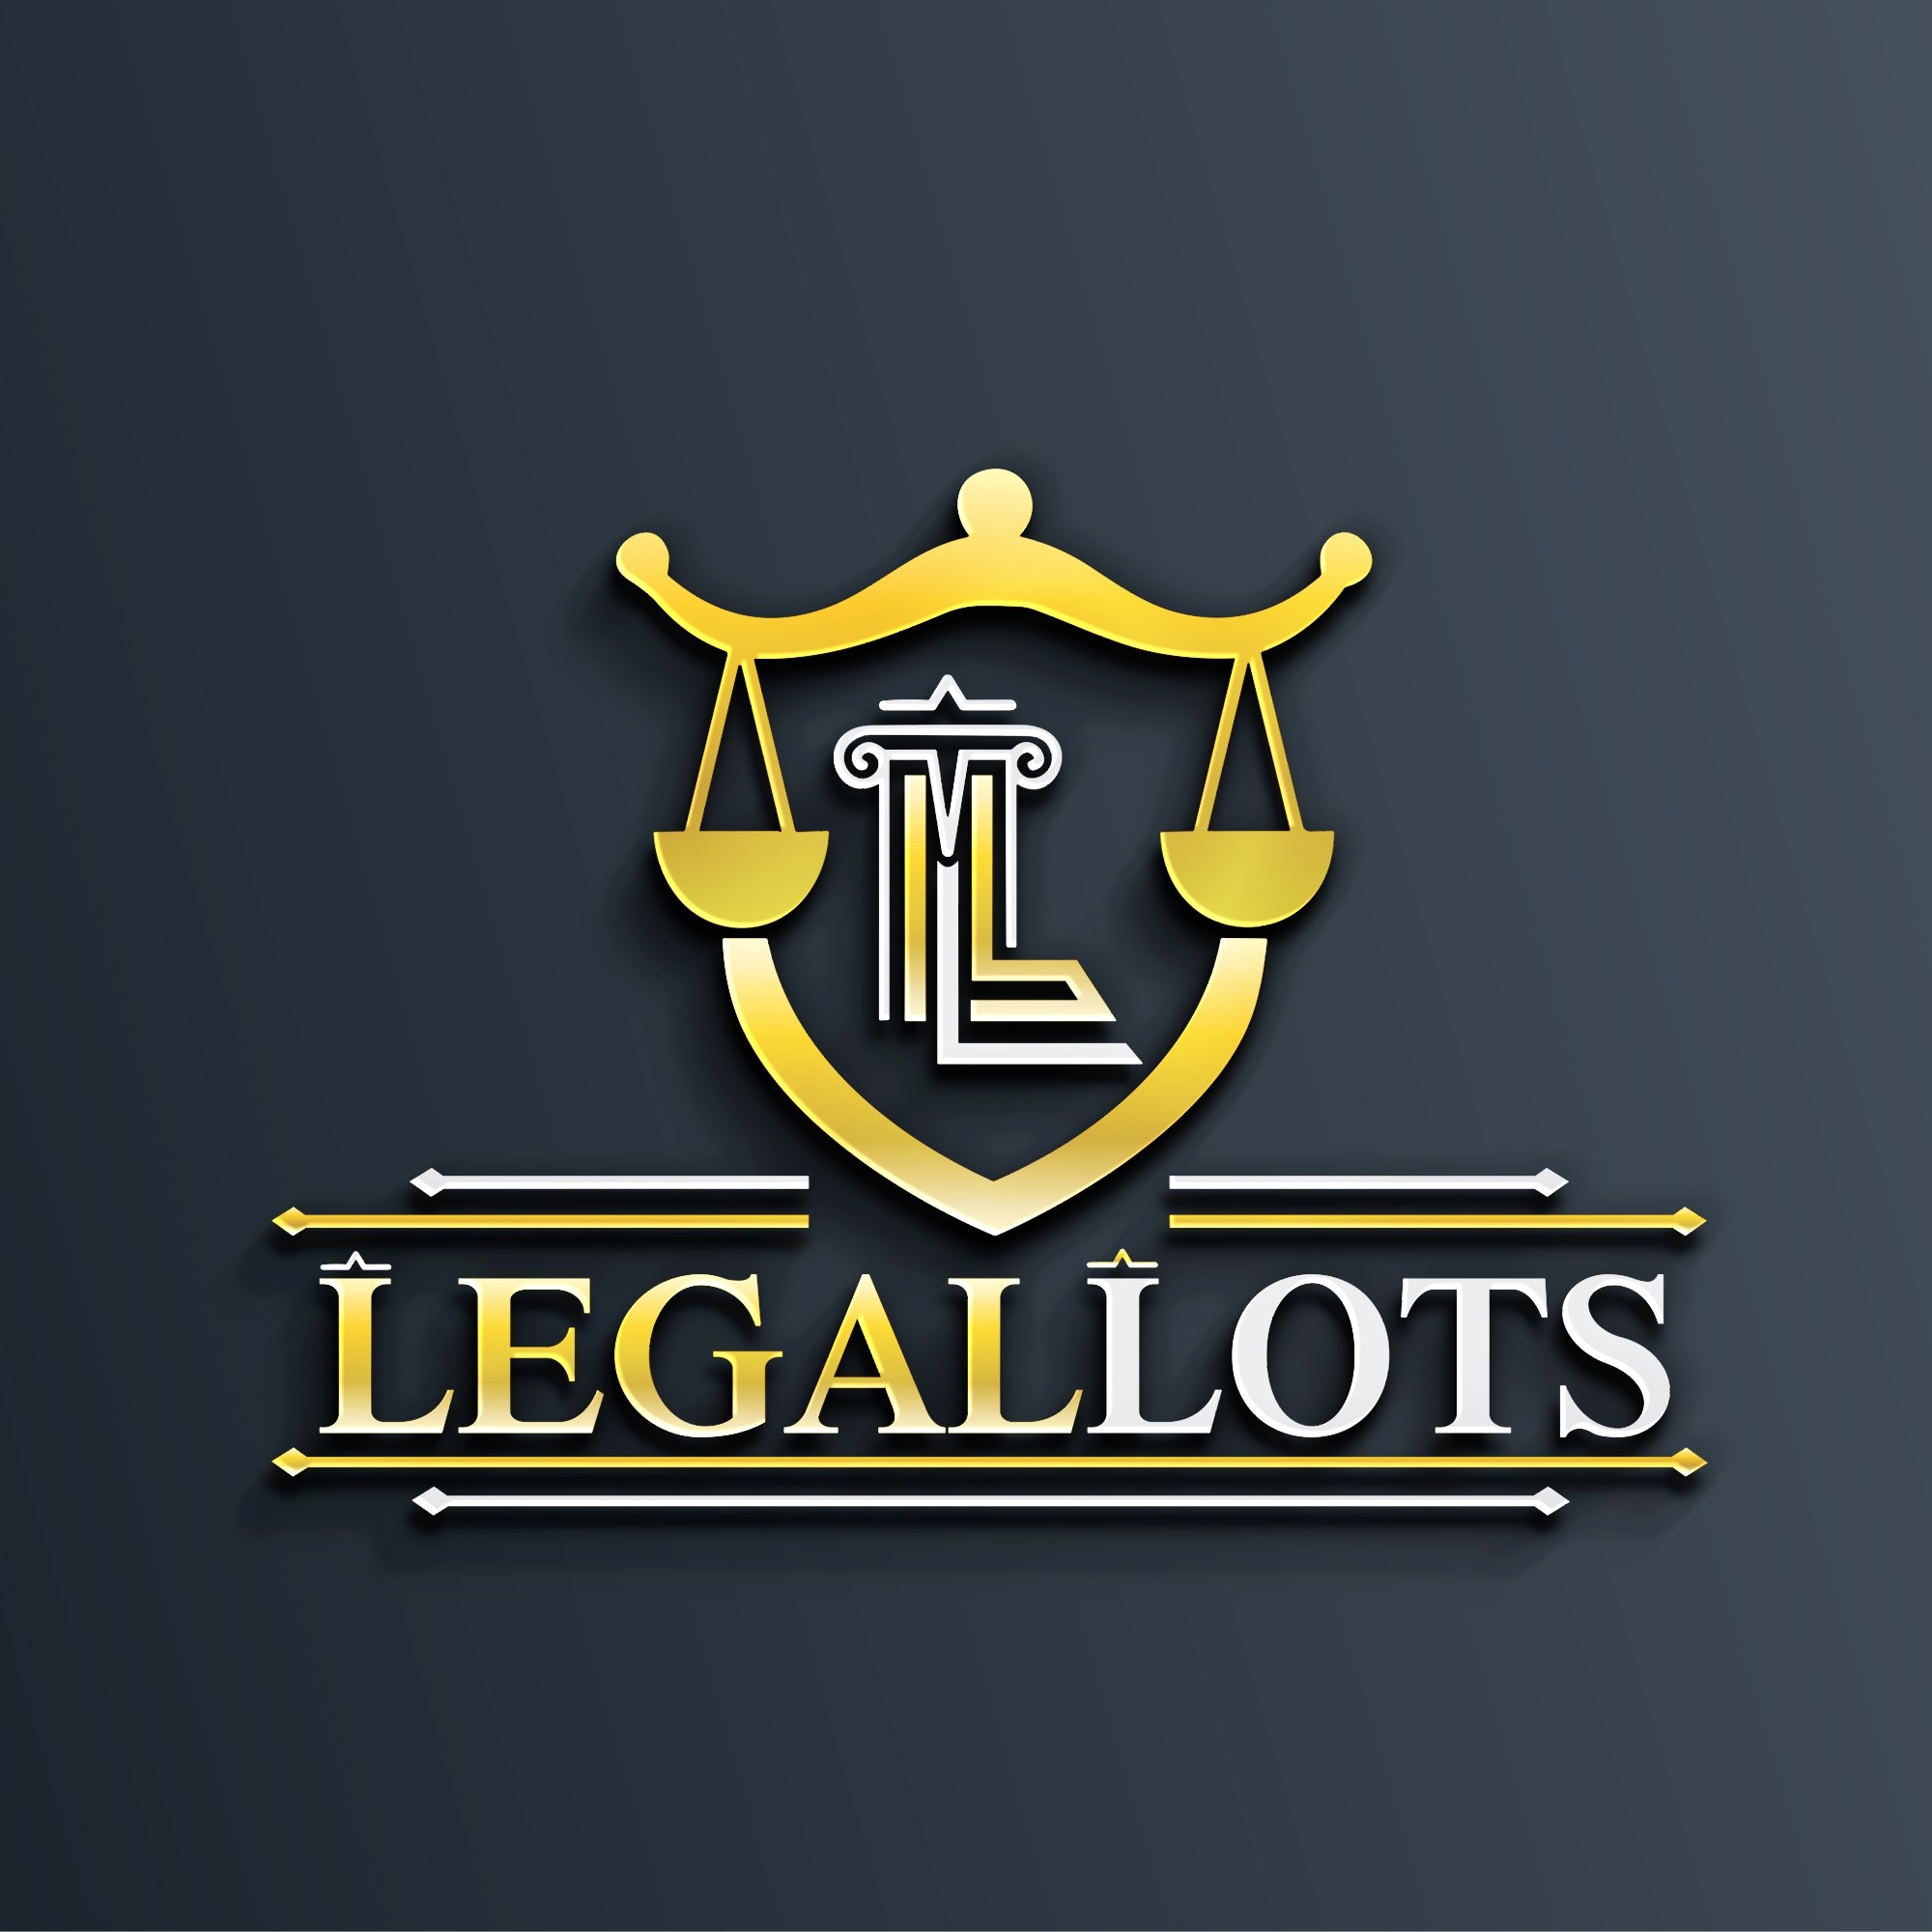 LegalLots Law Firm |Architect|Professional Services